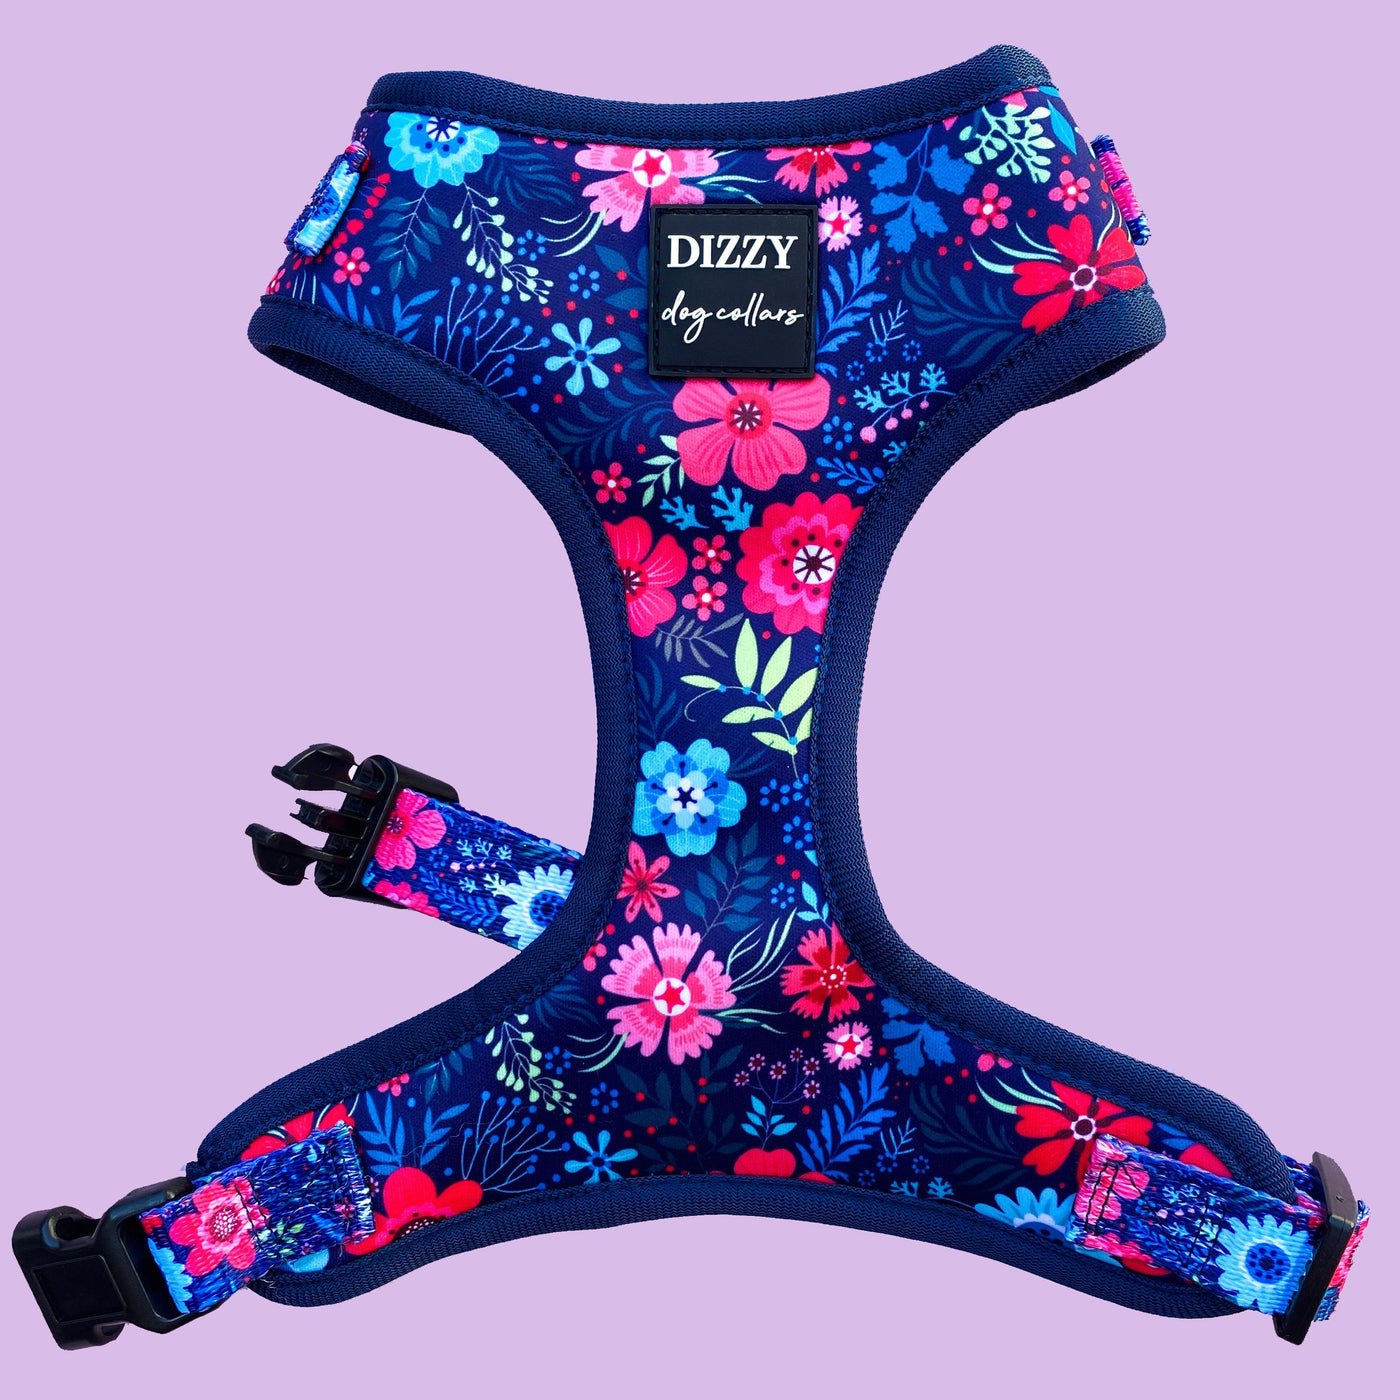 DOG HARNESS - Navy Floral - Neck Adjustable Harness-Harness-Dizzy Dog Collars